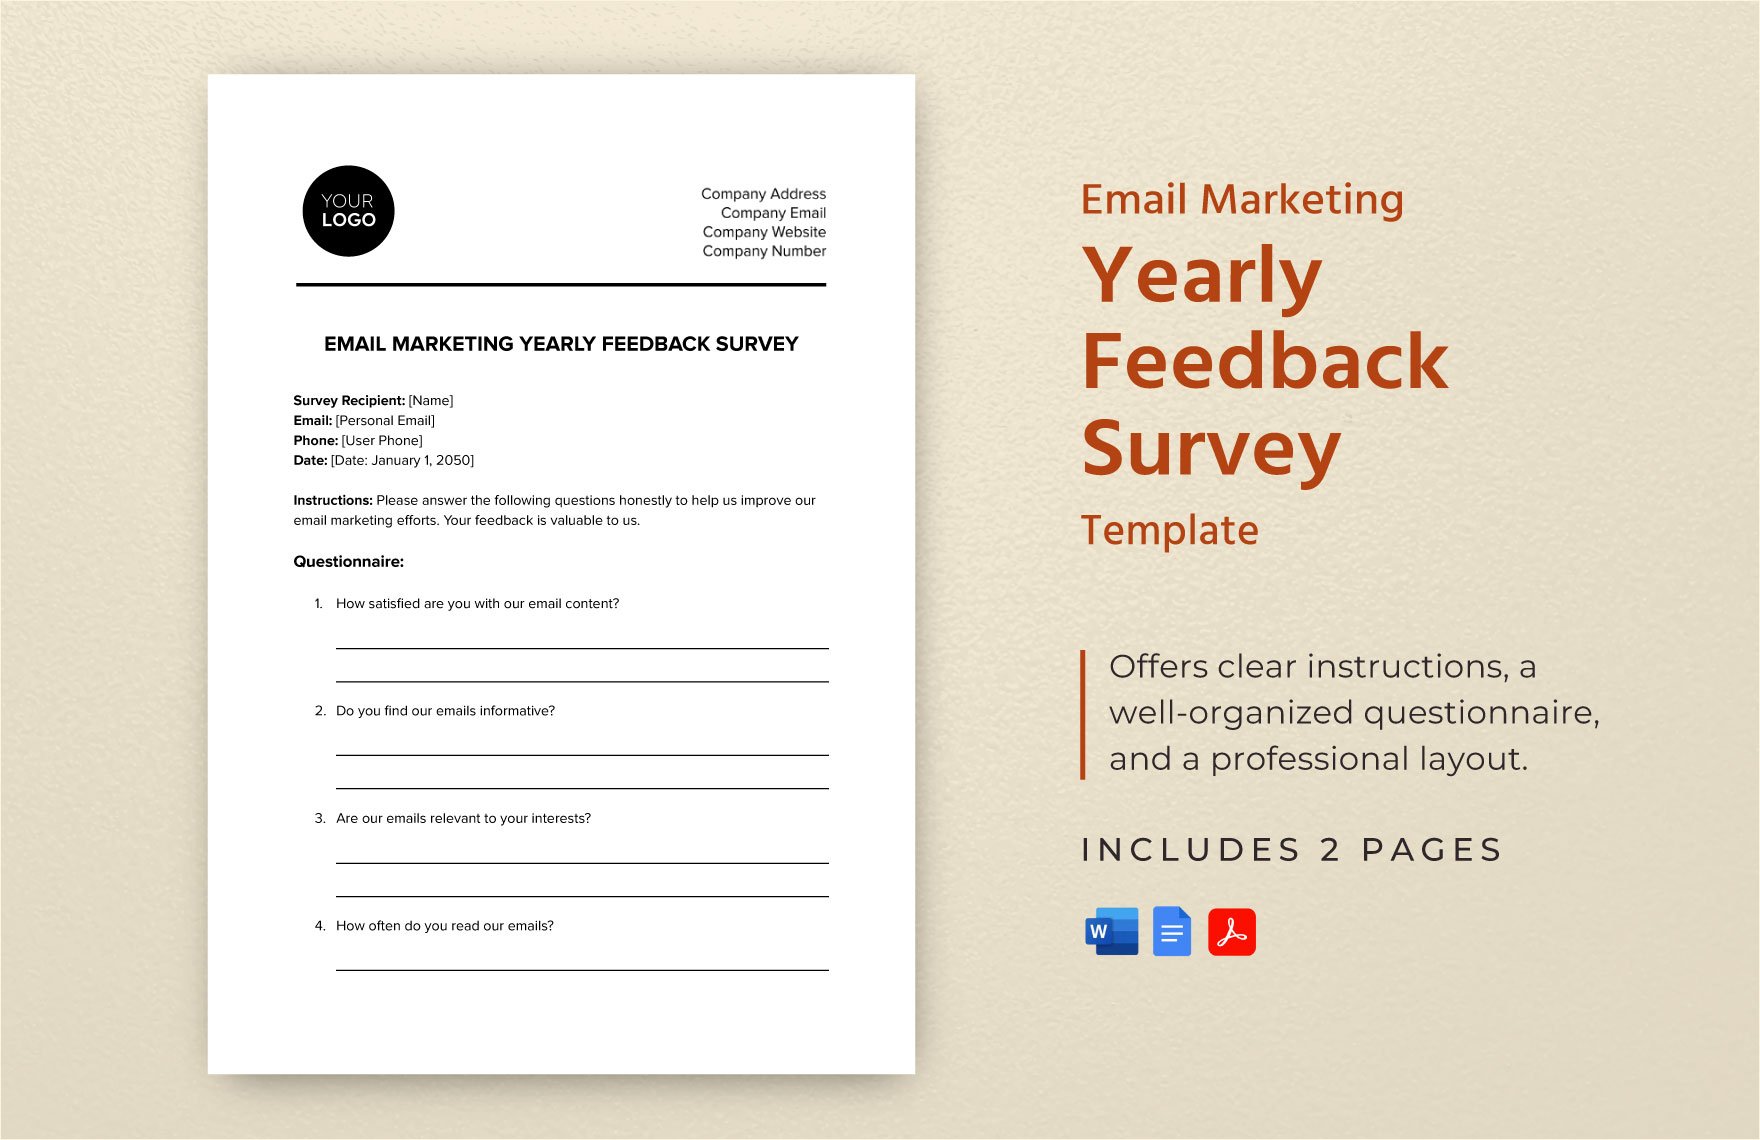 Email Marketing Yearly Feedback Survey Template